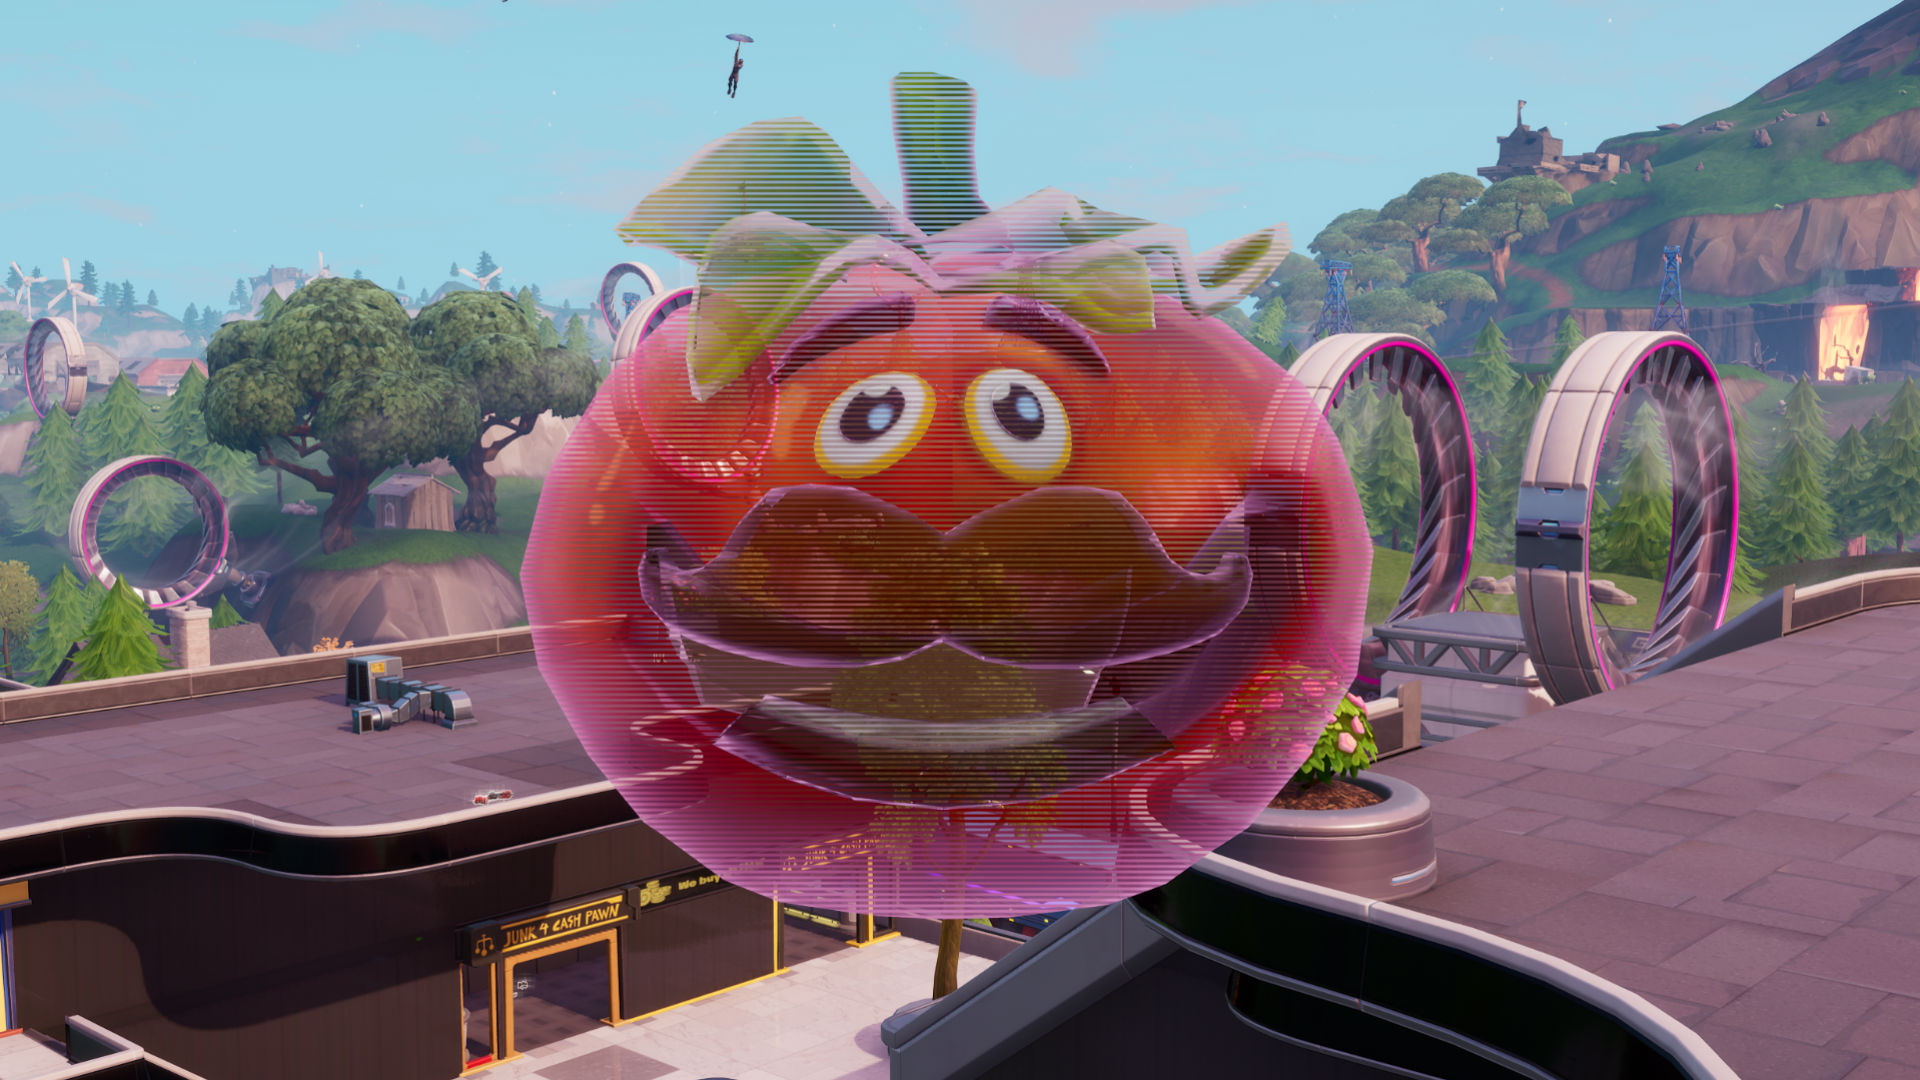 Where Is The Giant Holographic Tomato Head In Fortnite Fortnite Dance Inside Holographic Tomato Head Holographic Durr Burger Head Giant Dumpling Head Pcgamesn